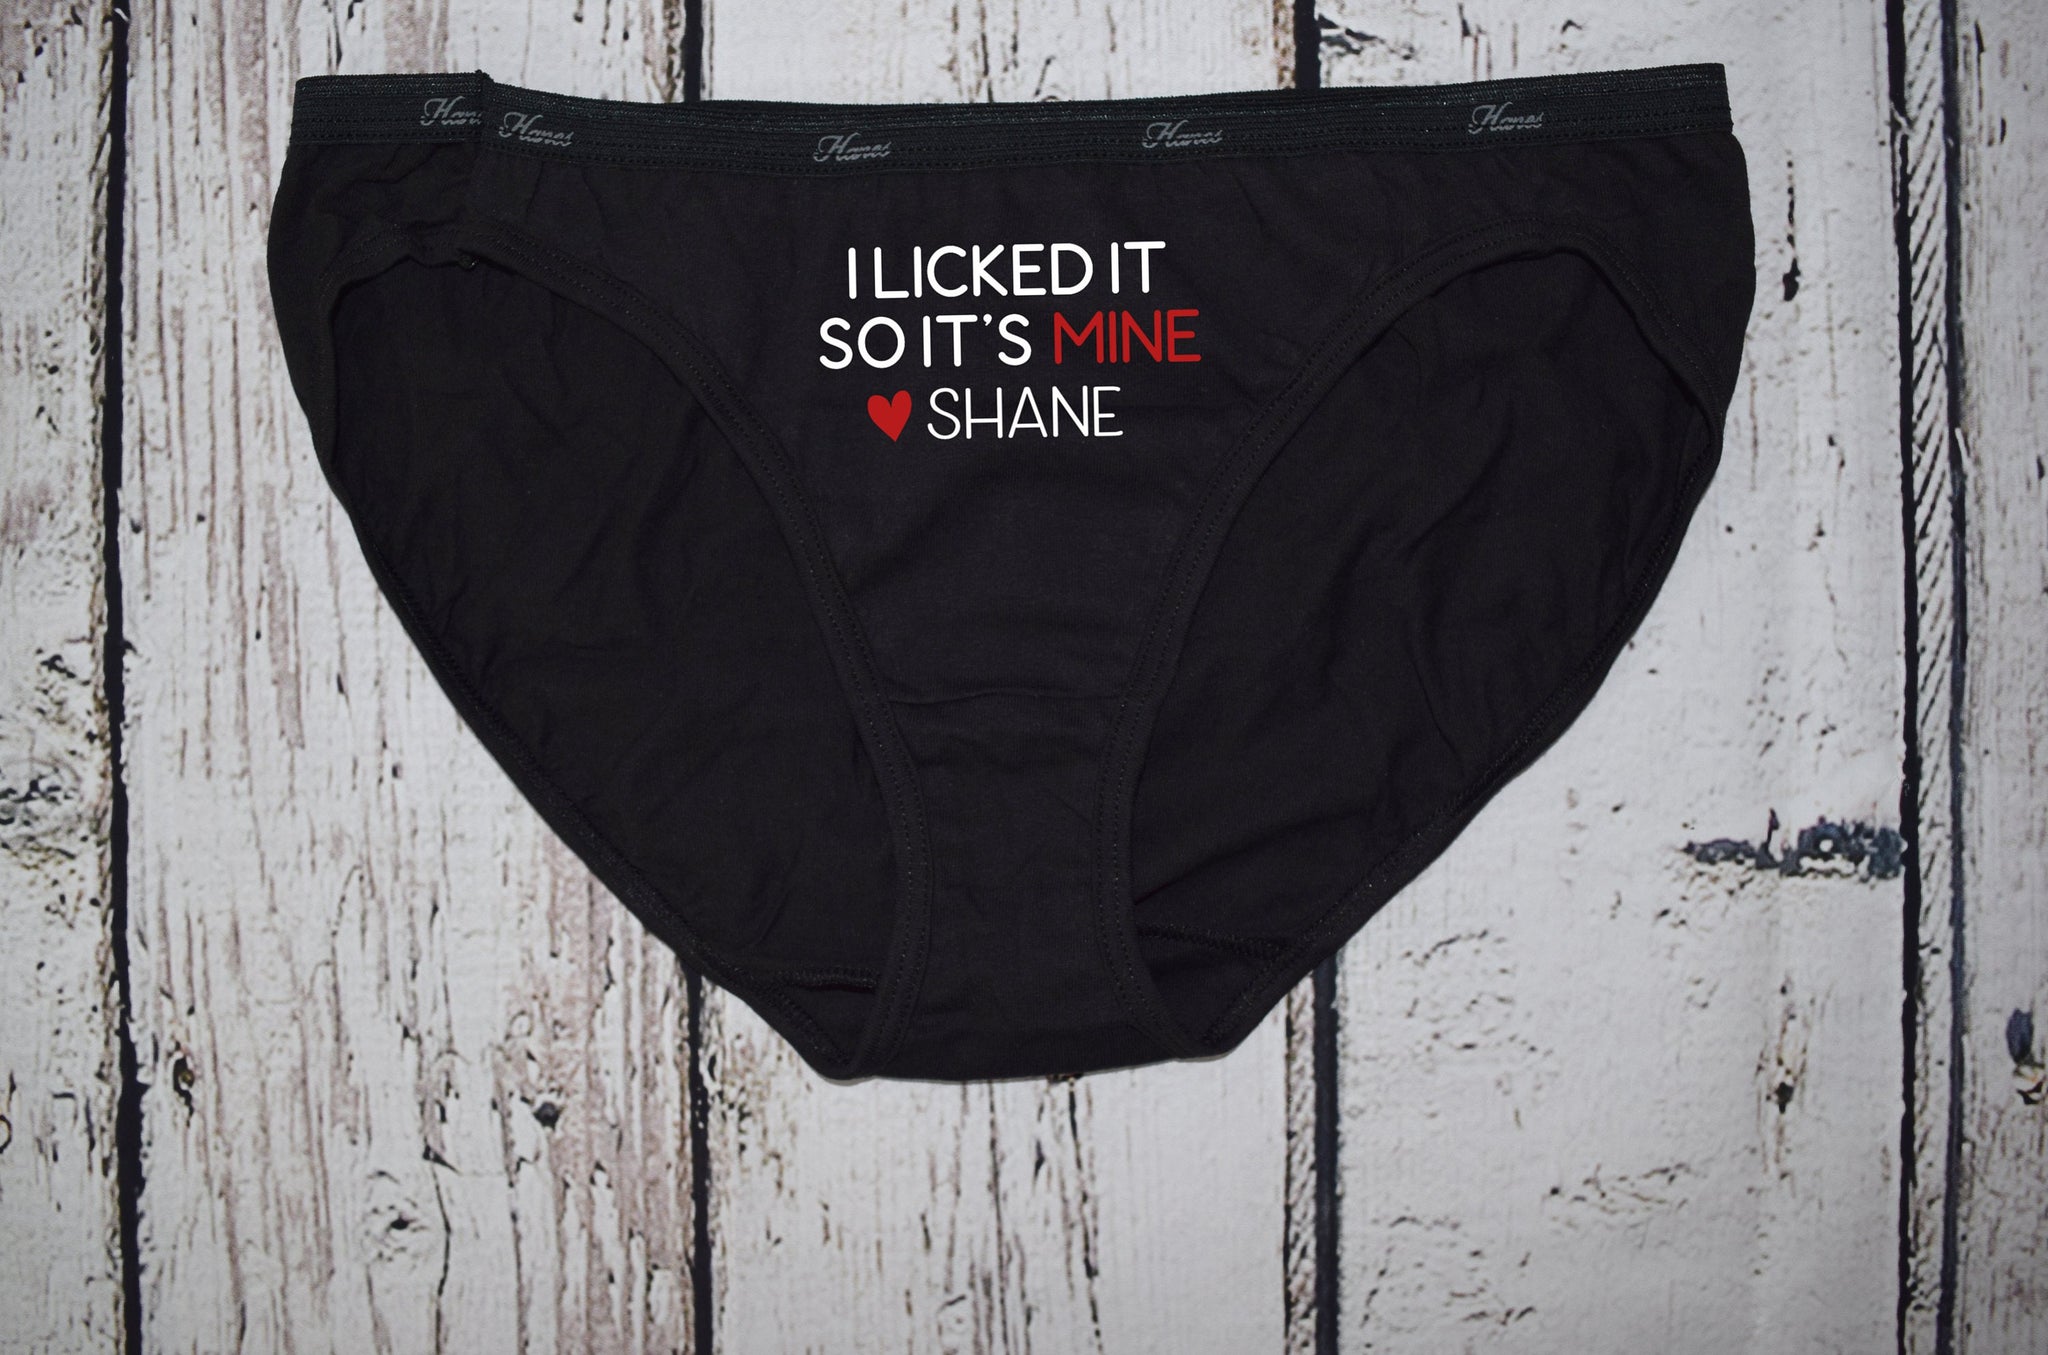 Personalized Funny Naughty Panties